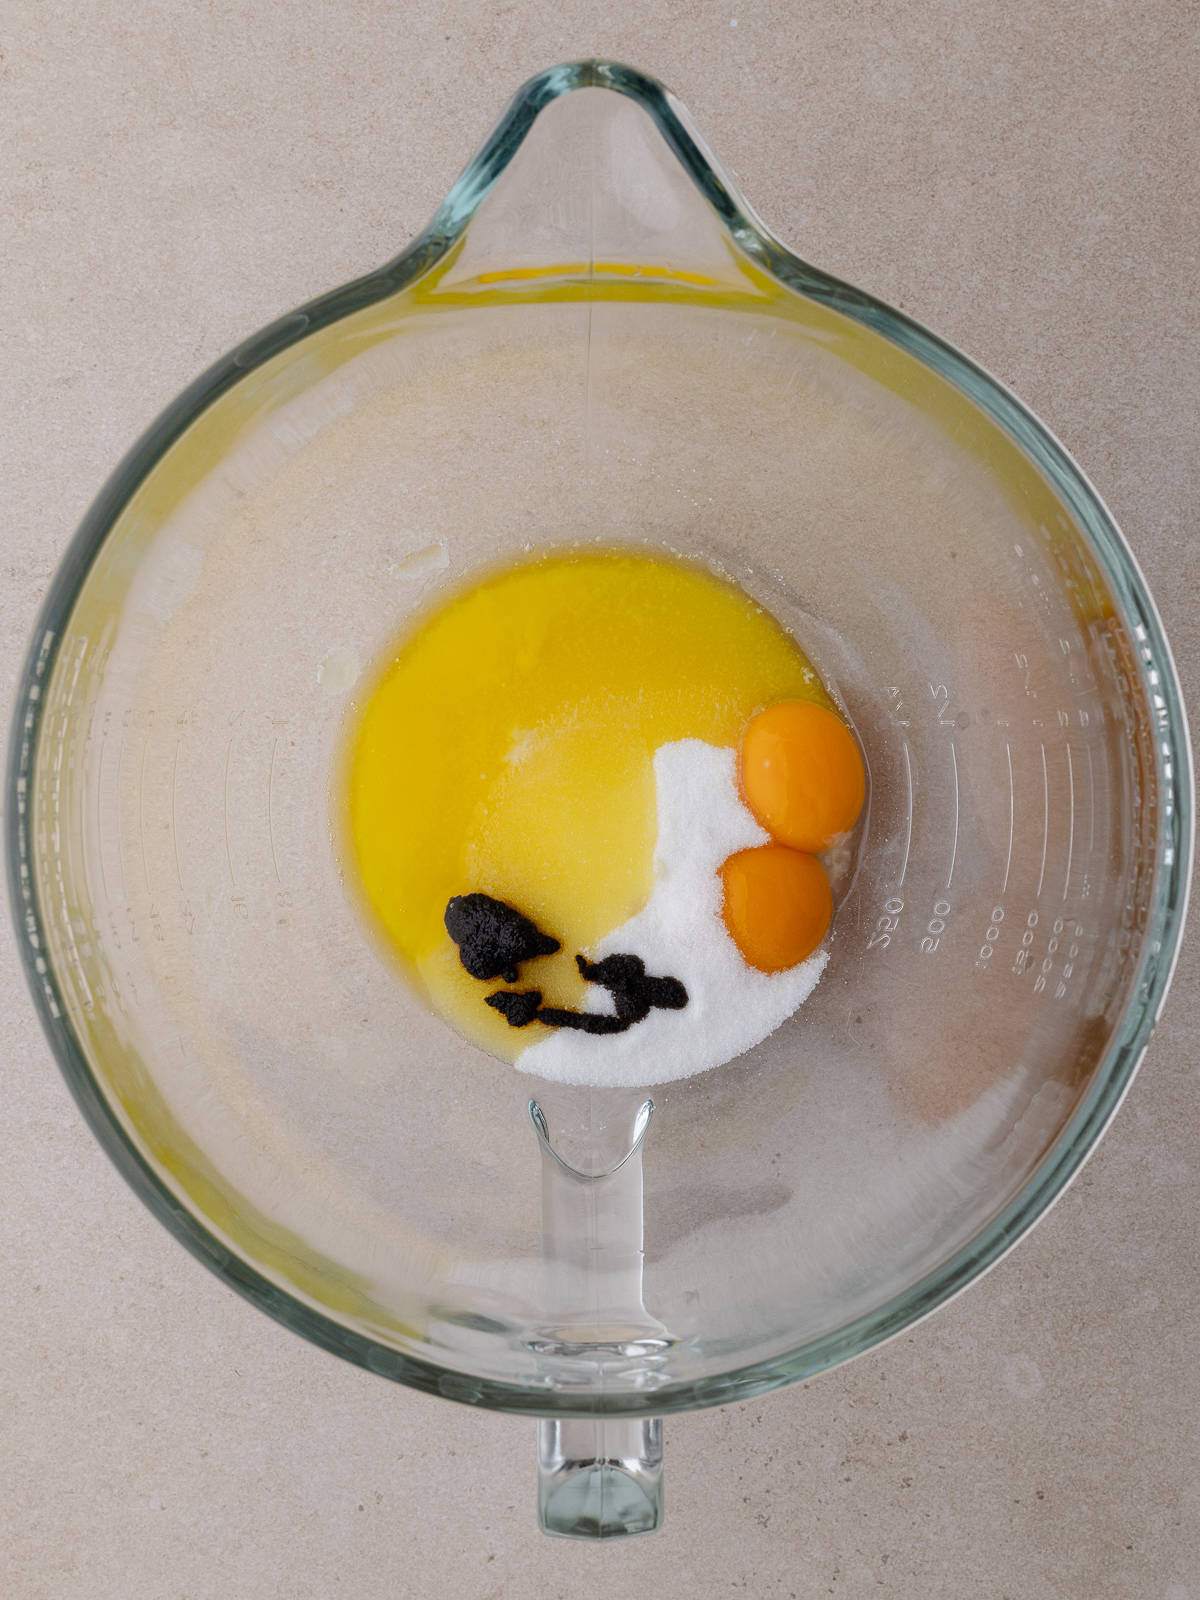 Melted butter, egg yolks, sugar and vanilla are in a large mixing bowl.